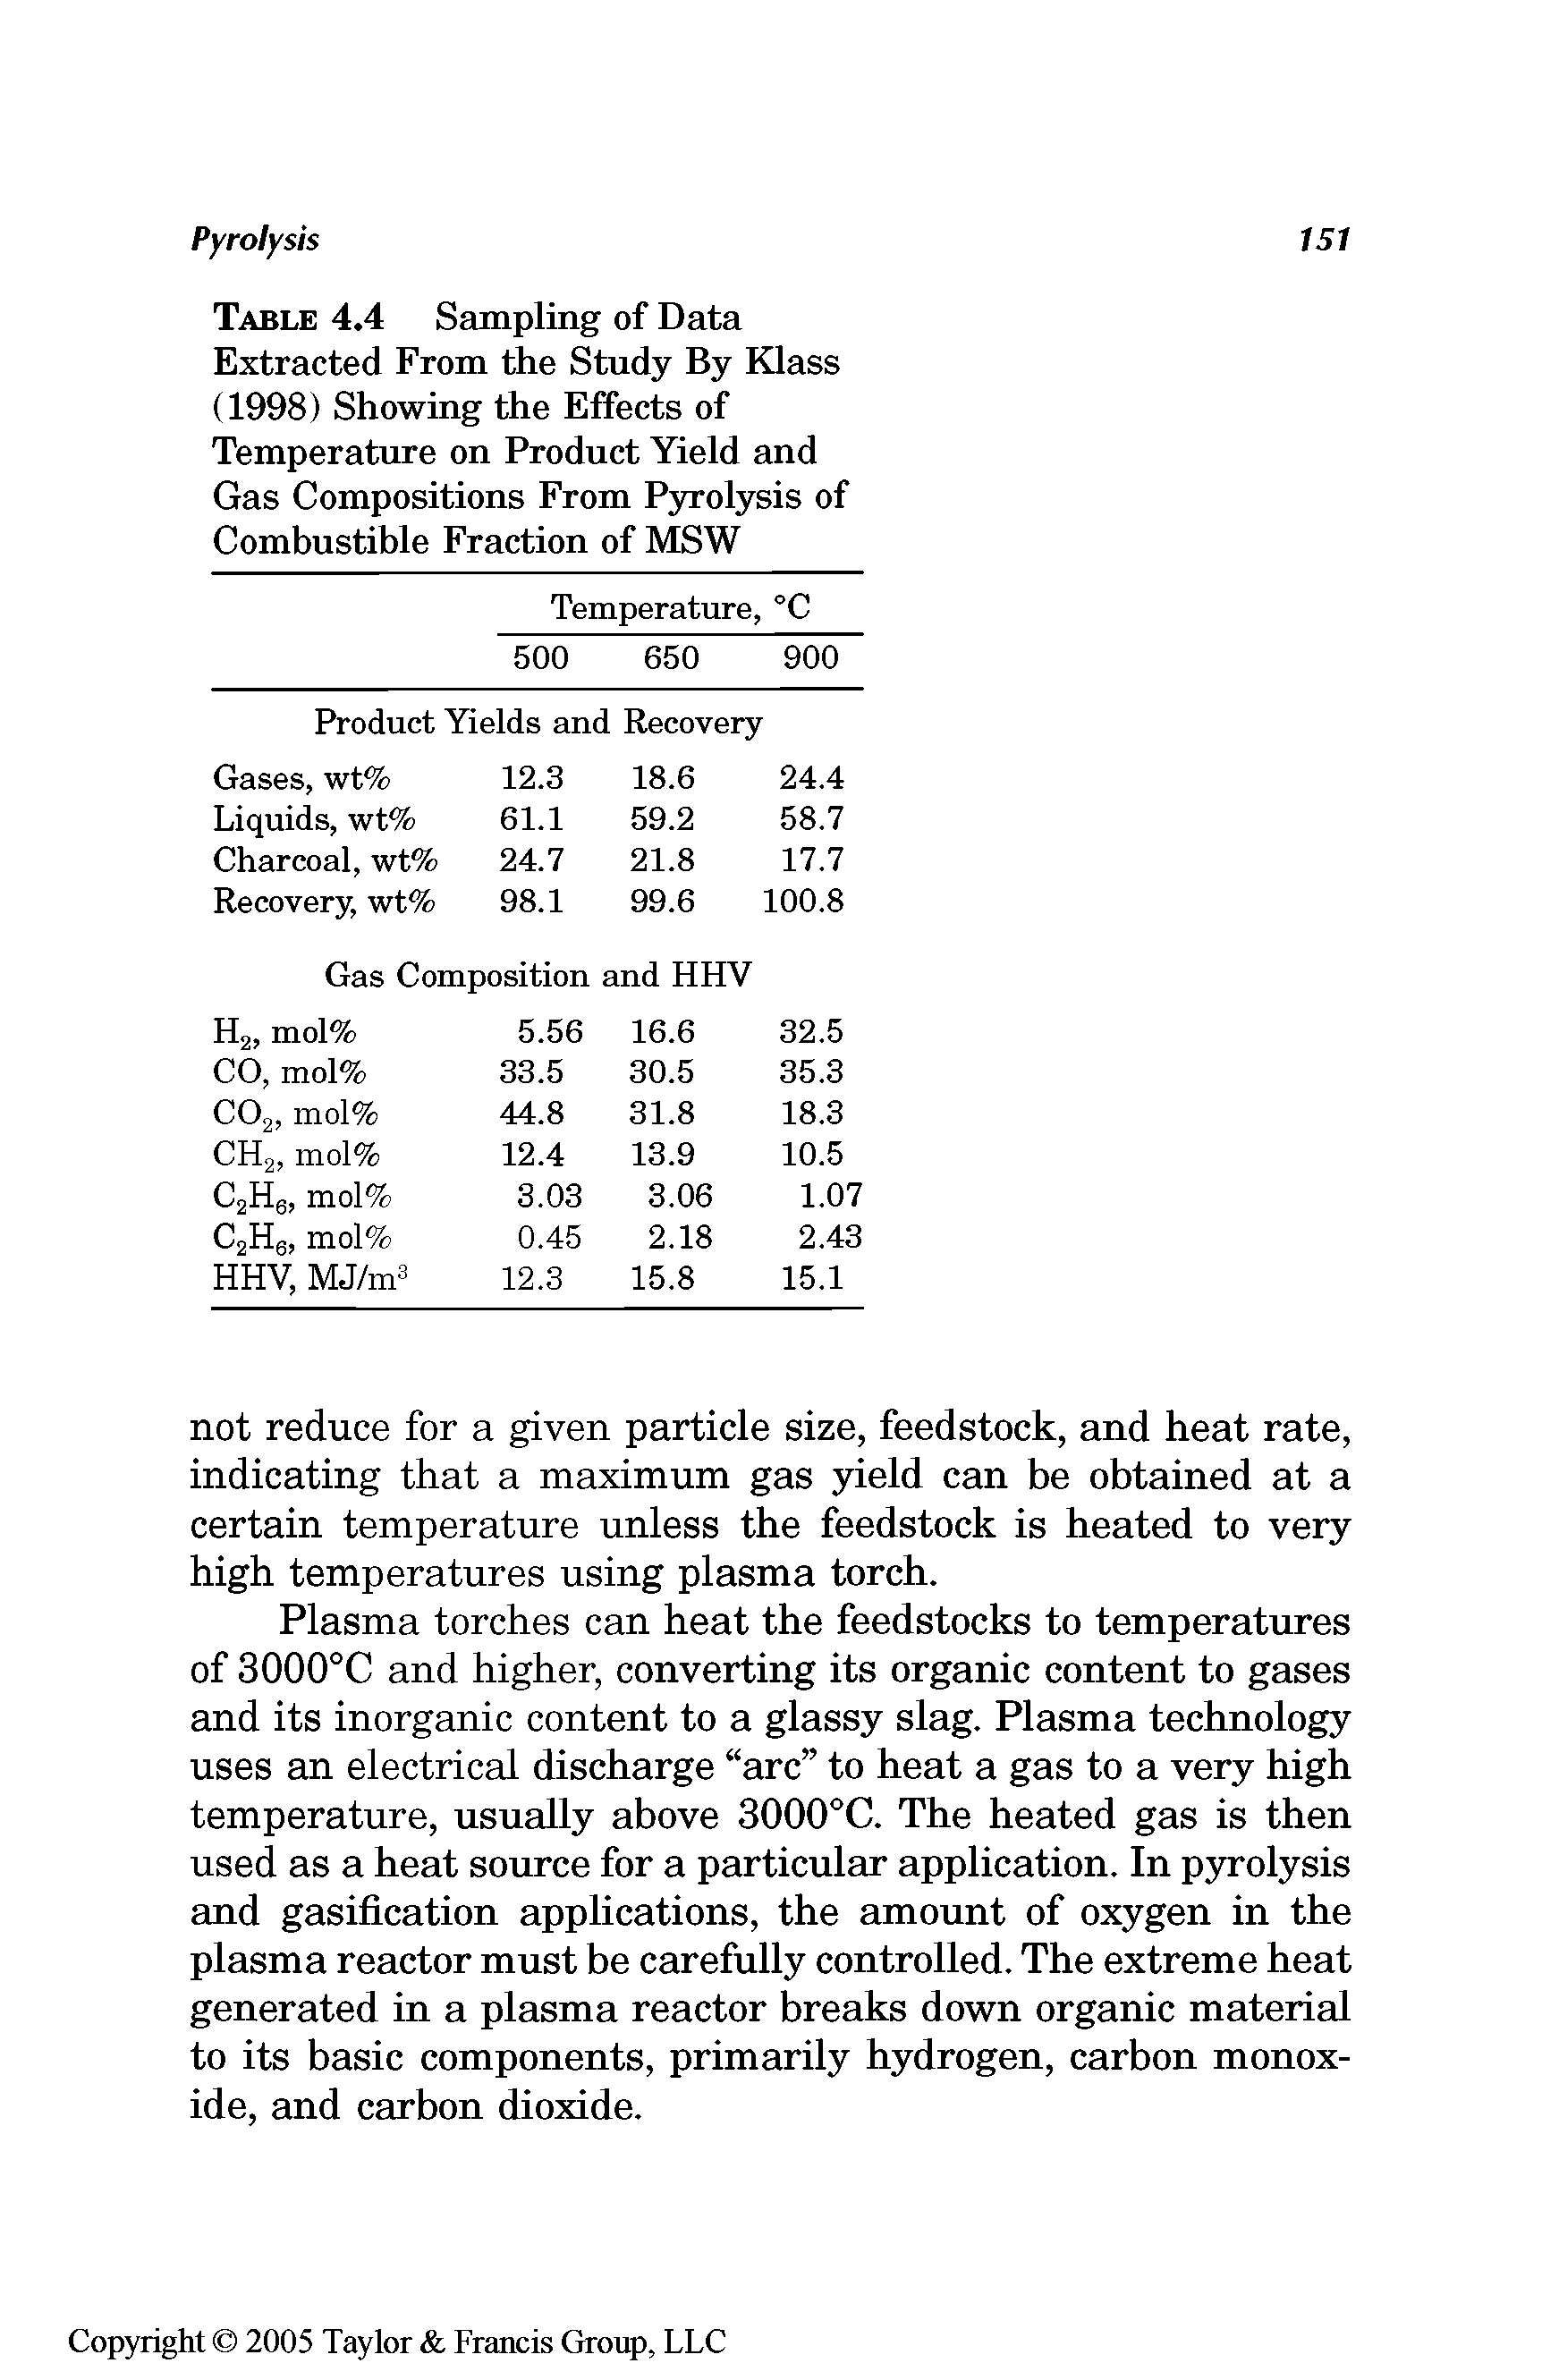 Table 4.4 Sampling of Data Extracted From the Study By Klass (1998) Showing the Effects of Temperature on Product Yield and Gas Compositions From Pyrolysis of Combustible Fraction of MSW...